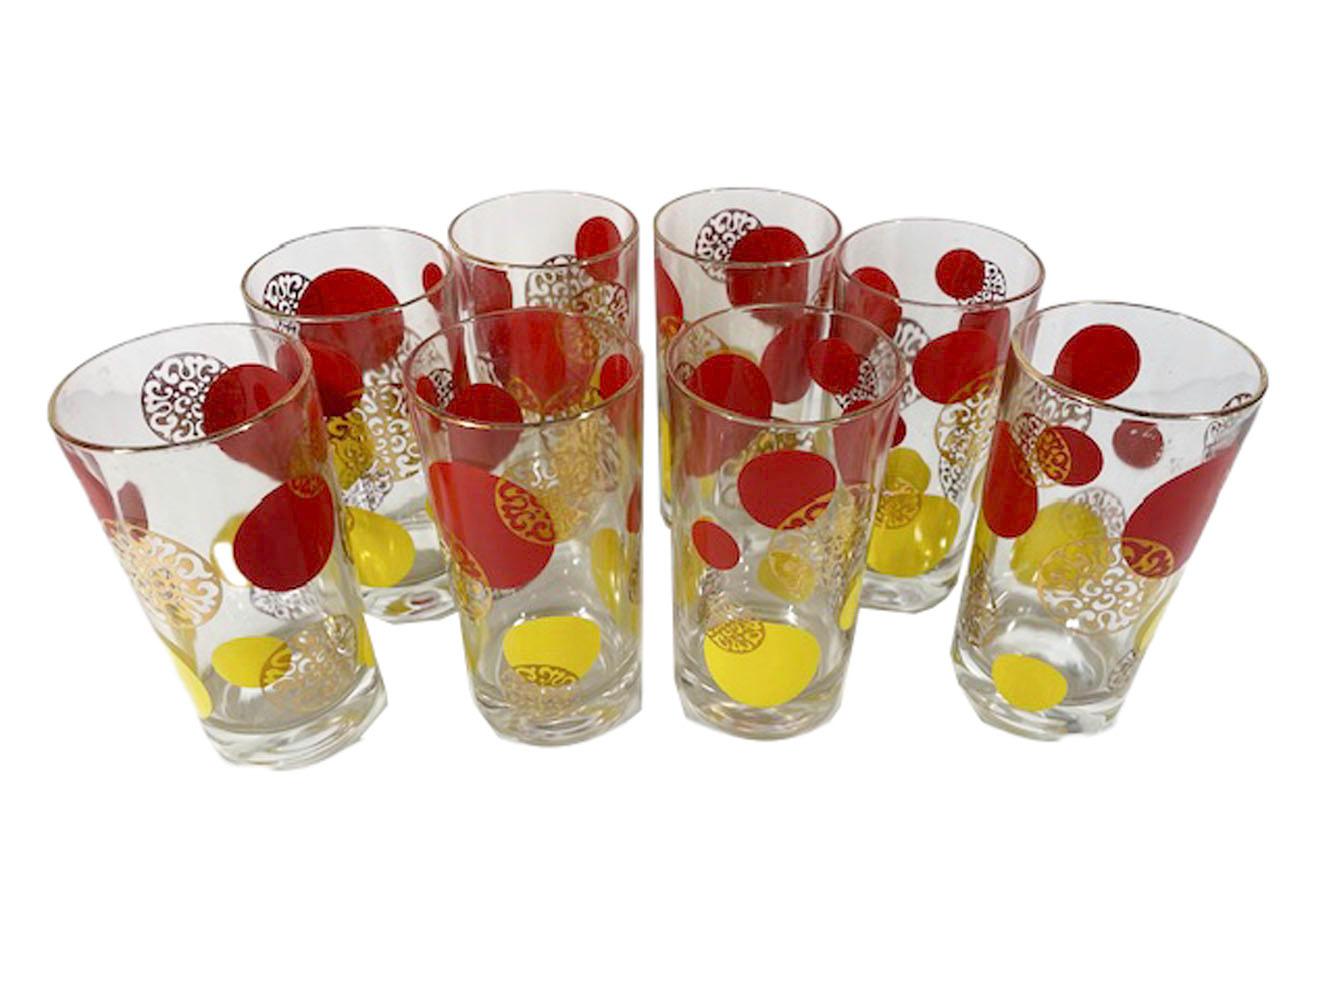 Set of eight Mid-Century Modern highball glasses with red and yellow enamel circles of various sizes along with 22k gold filigree medallions.